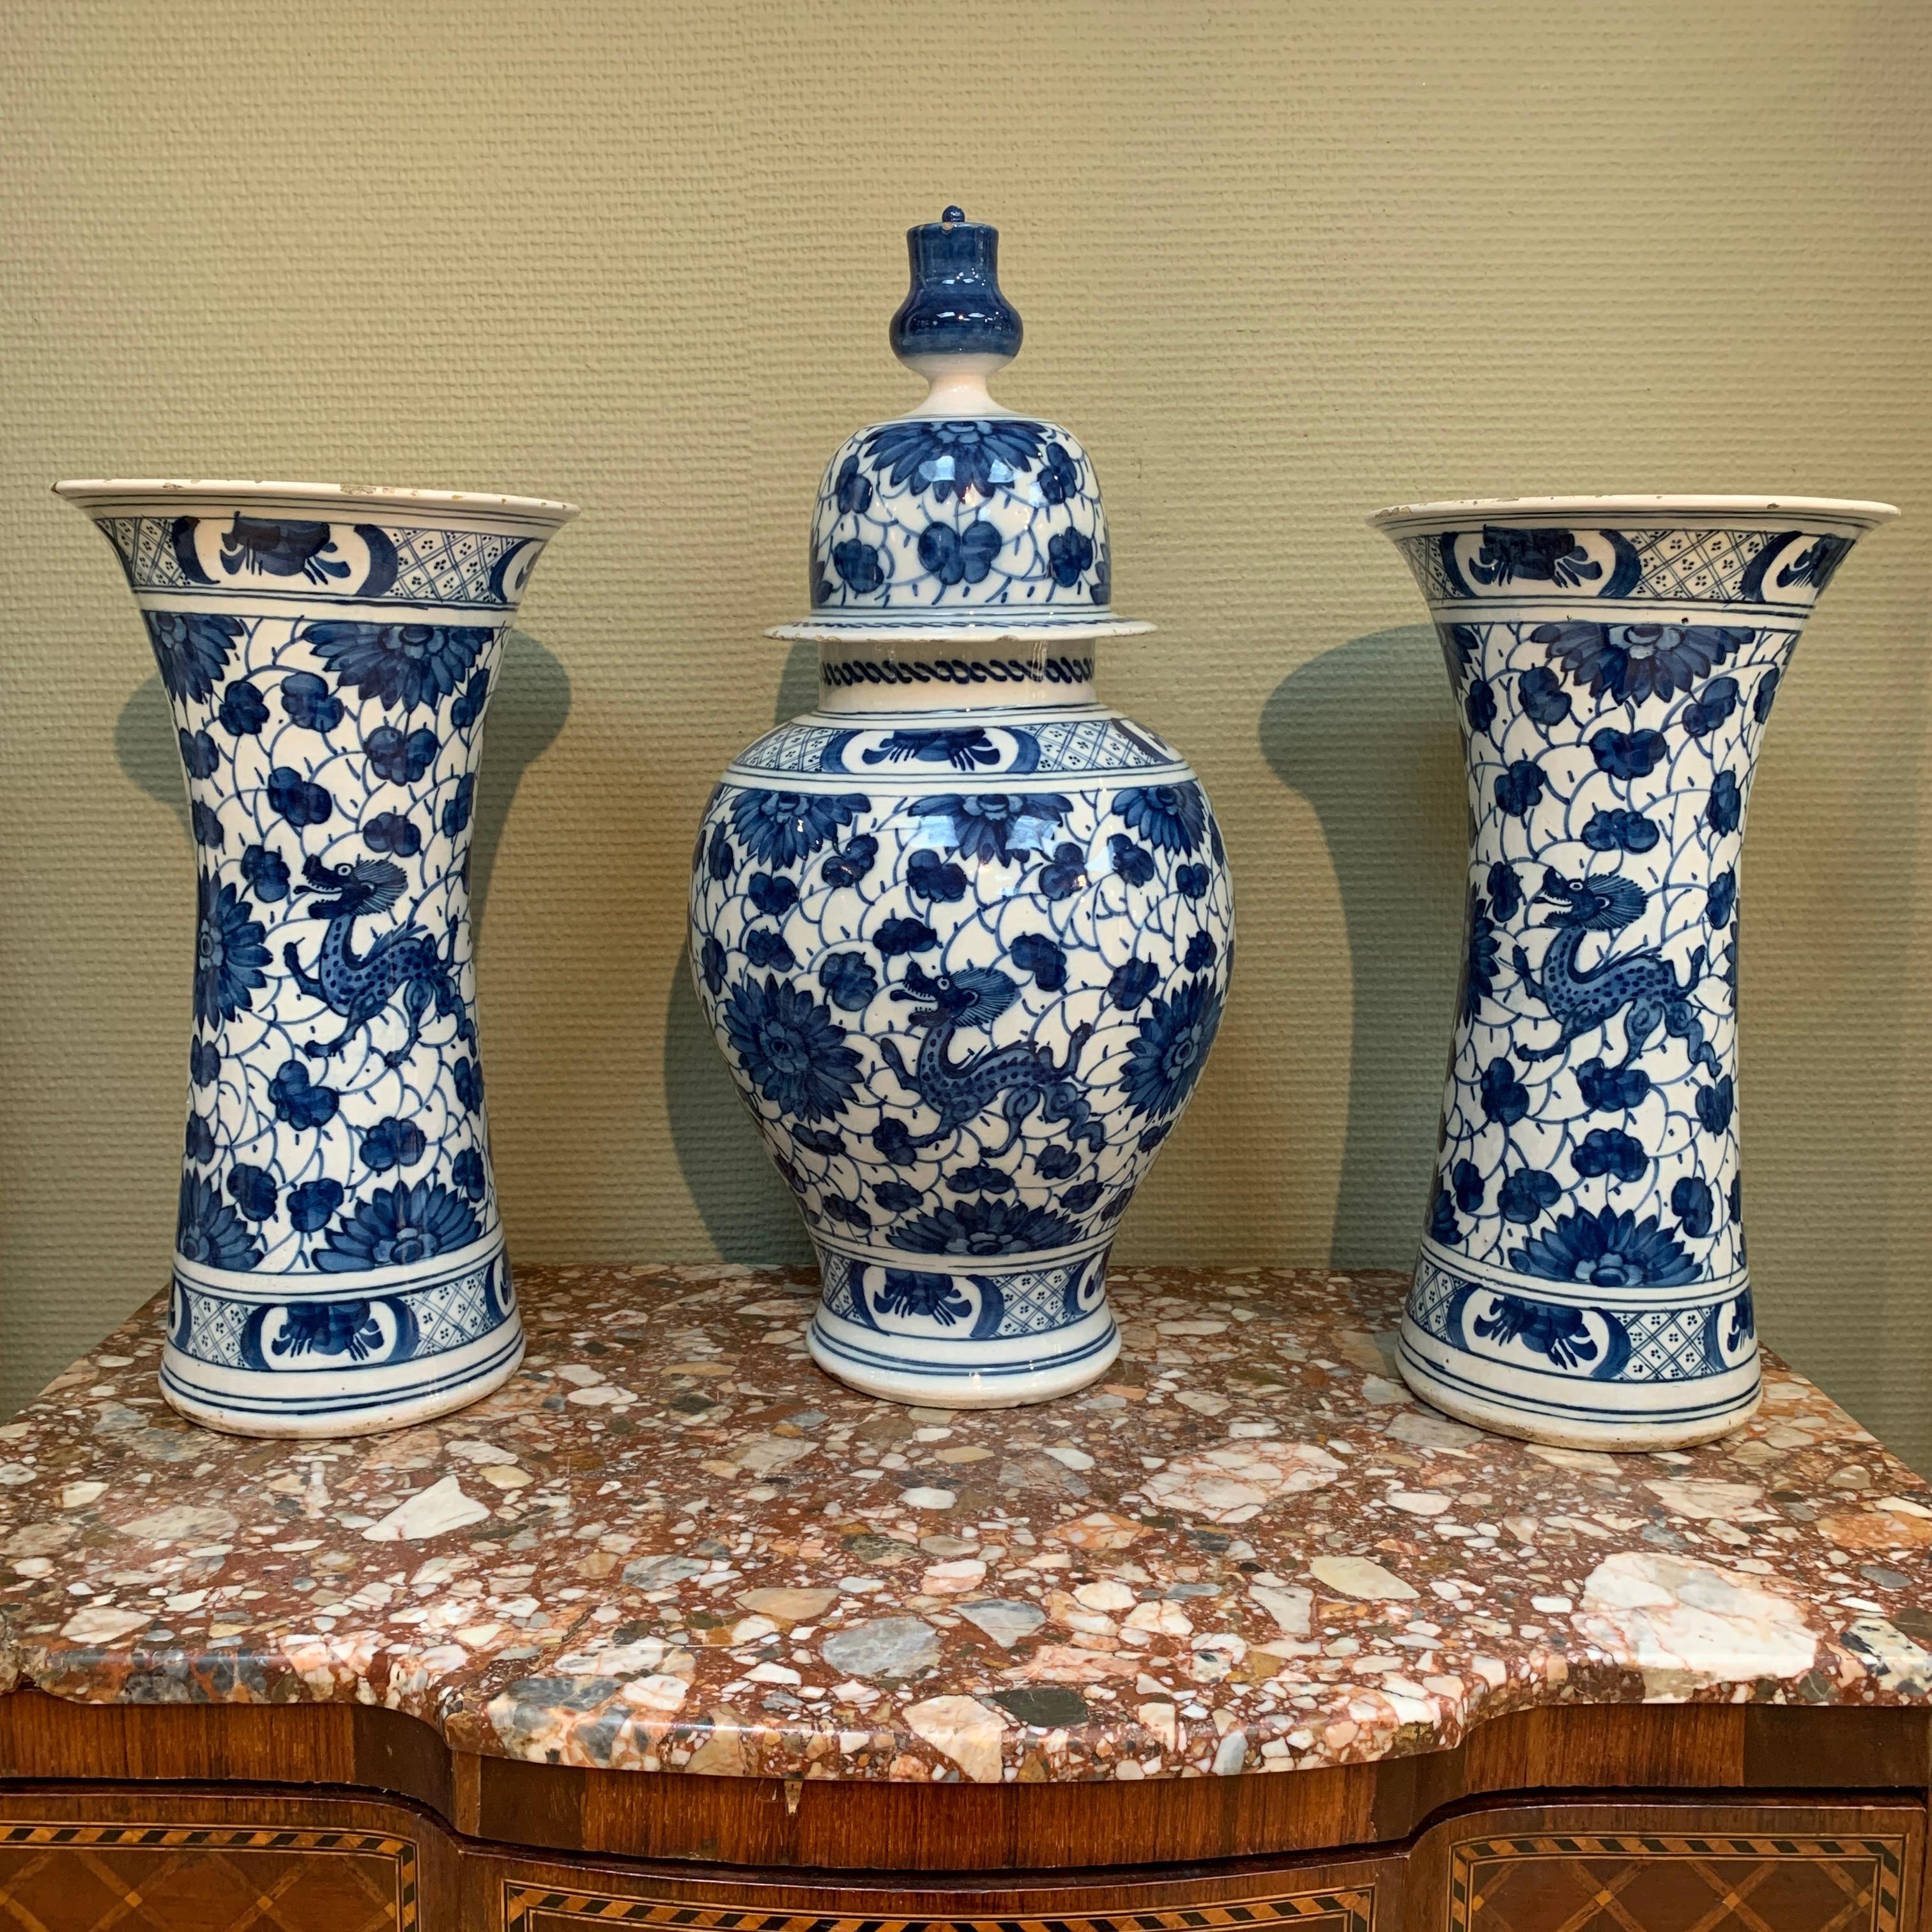 Baroque Rare and Large Dutch Delft Dragons Three Piece Garniture Vases Set, Early 18th C